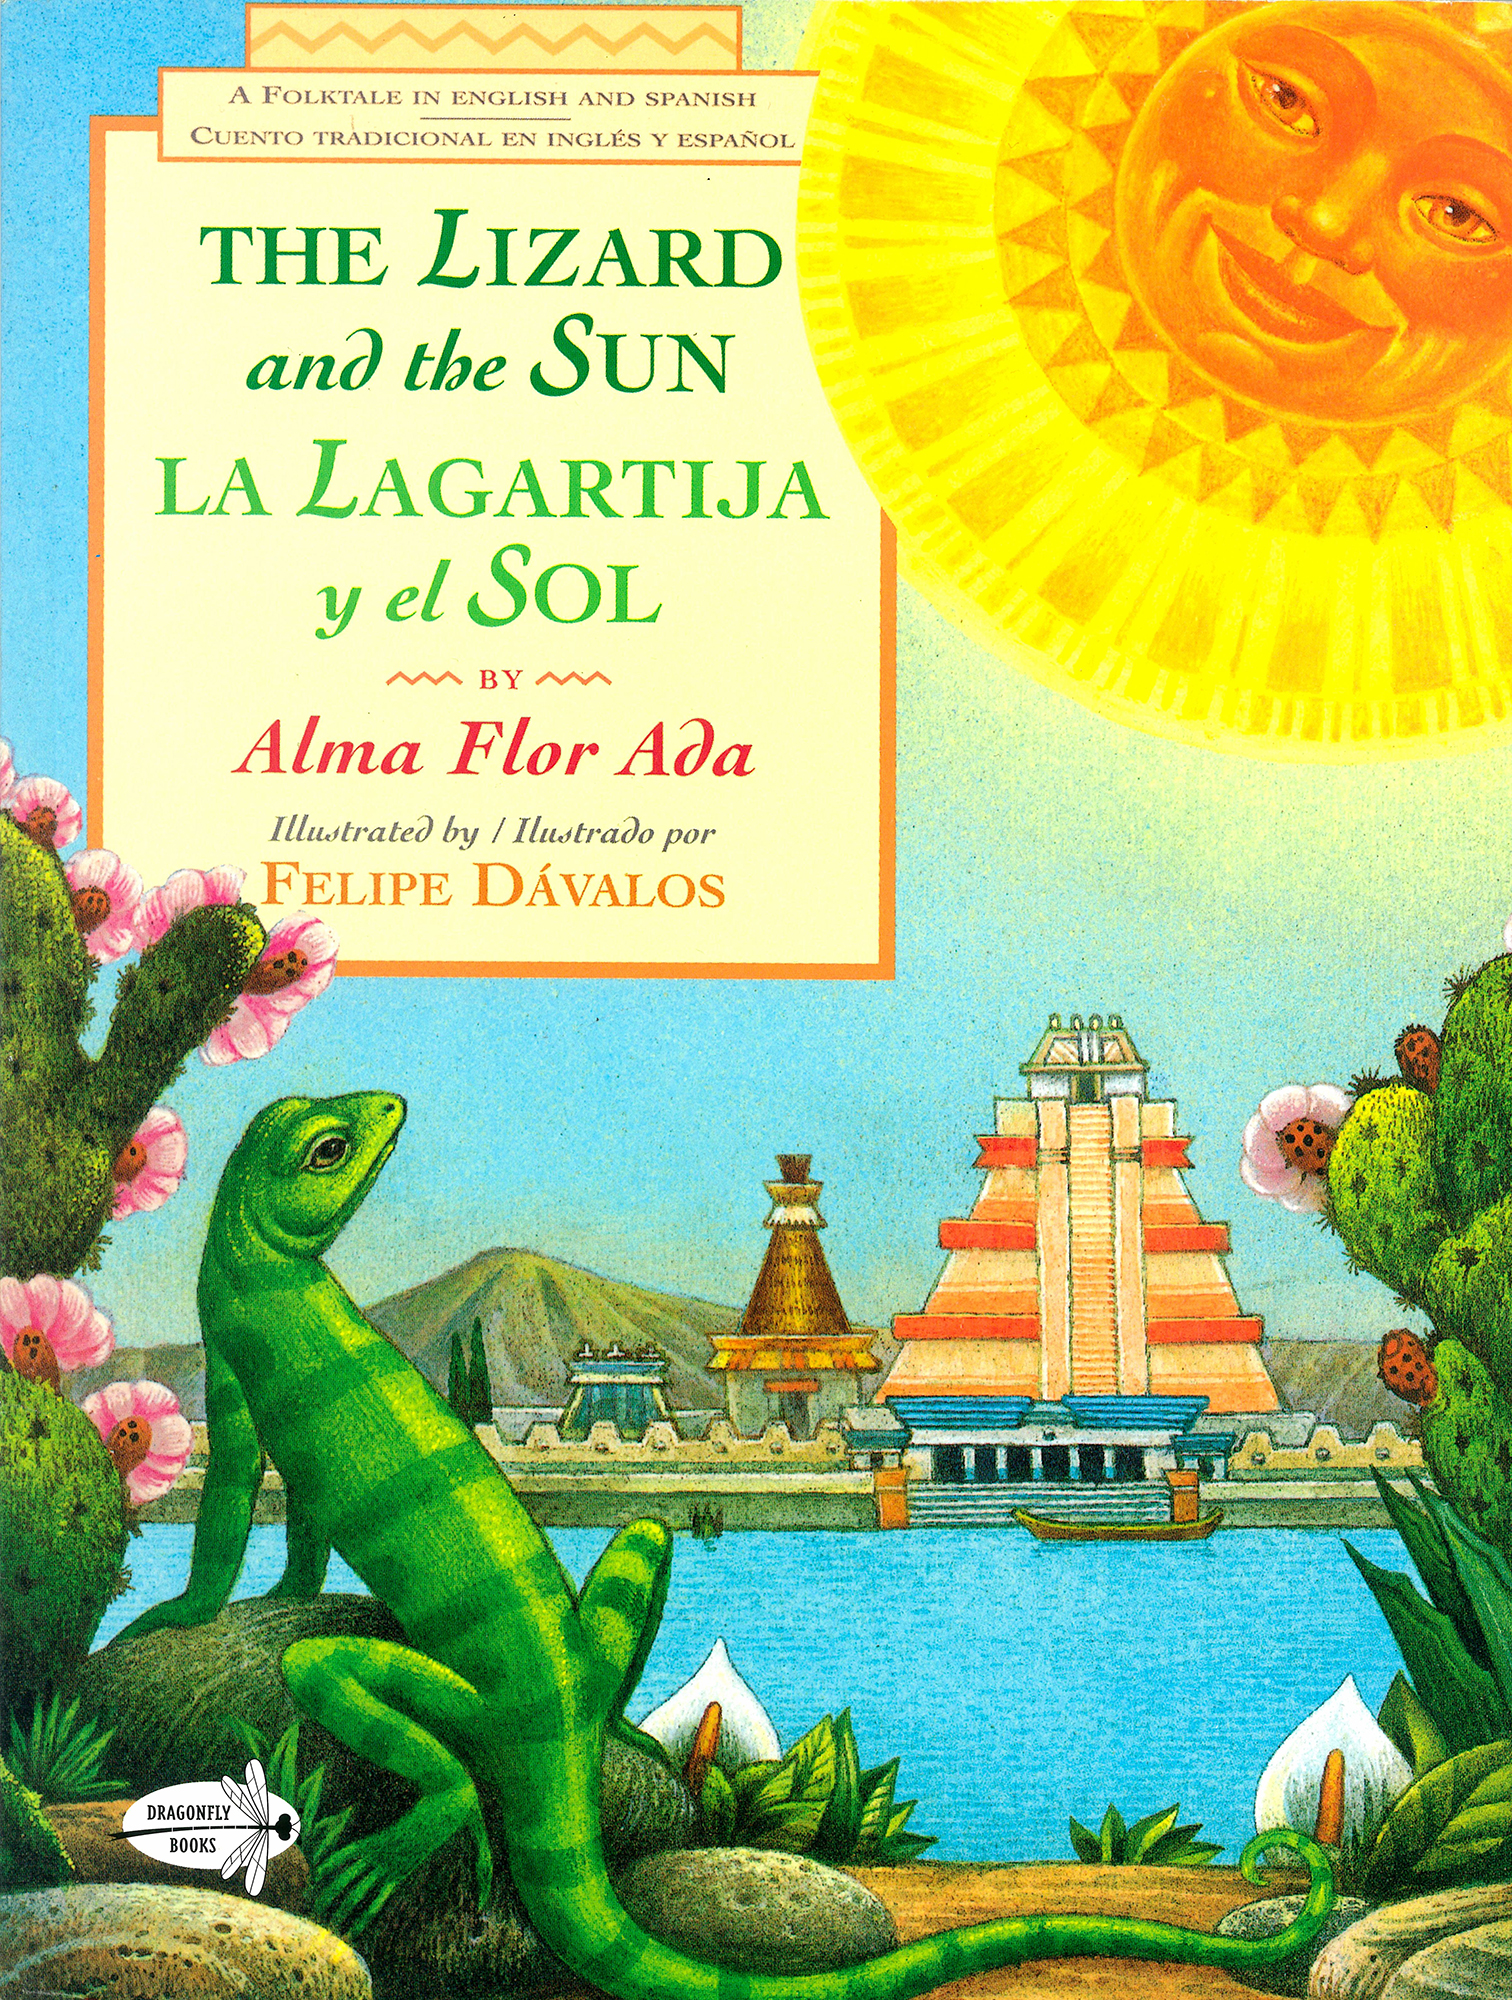 "The Lizard and the Sun (La Lagartija y el Sol)" book cover depicting a lizard looking across the water at a Mexican pyramid as a smiling sun beams down.